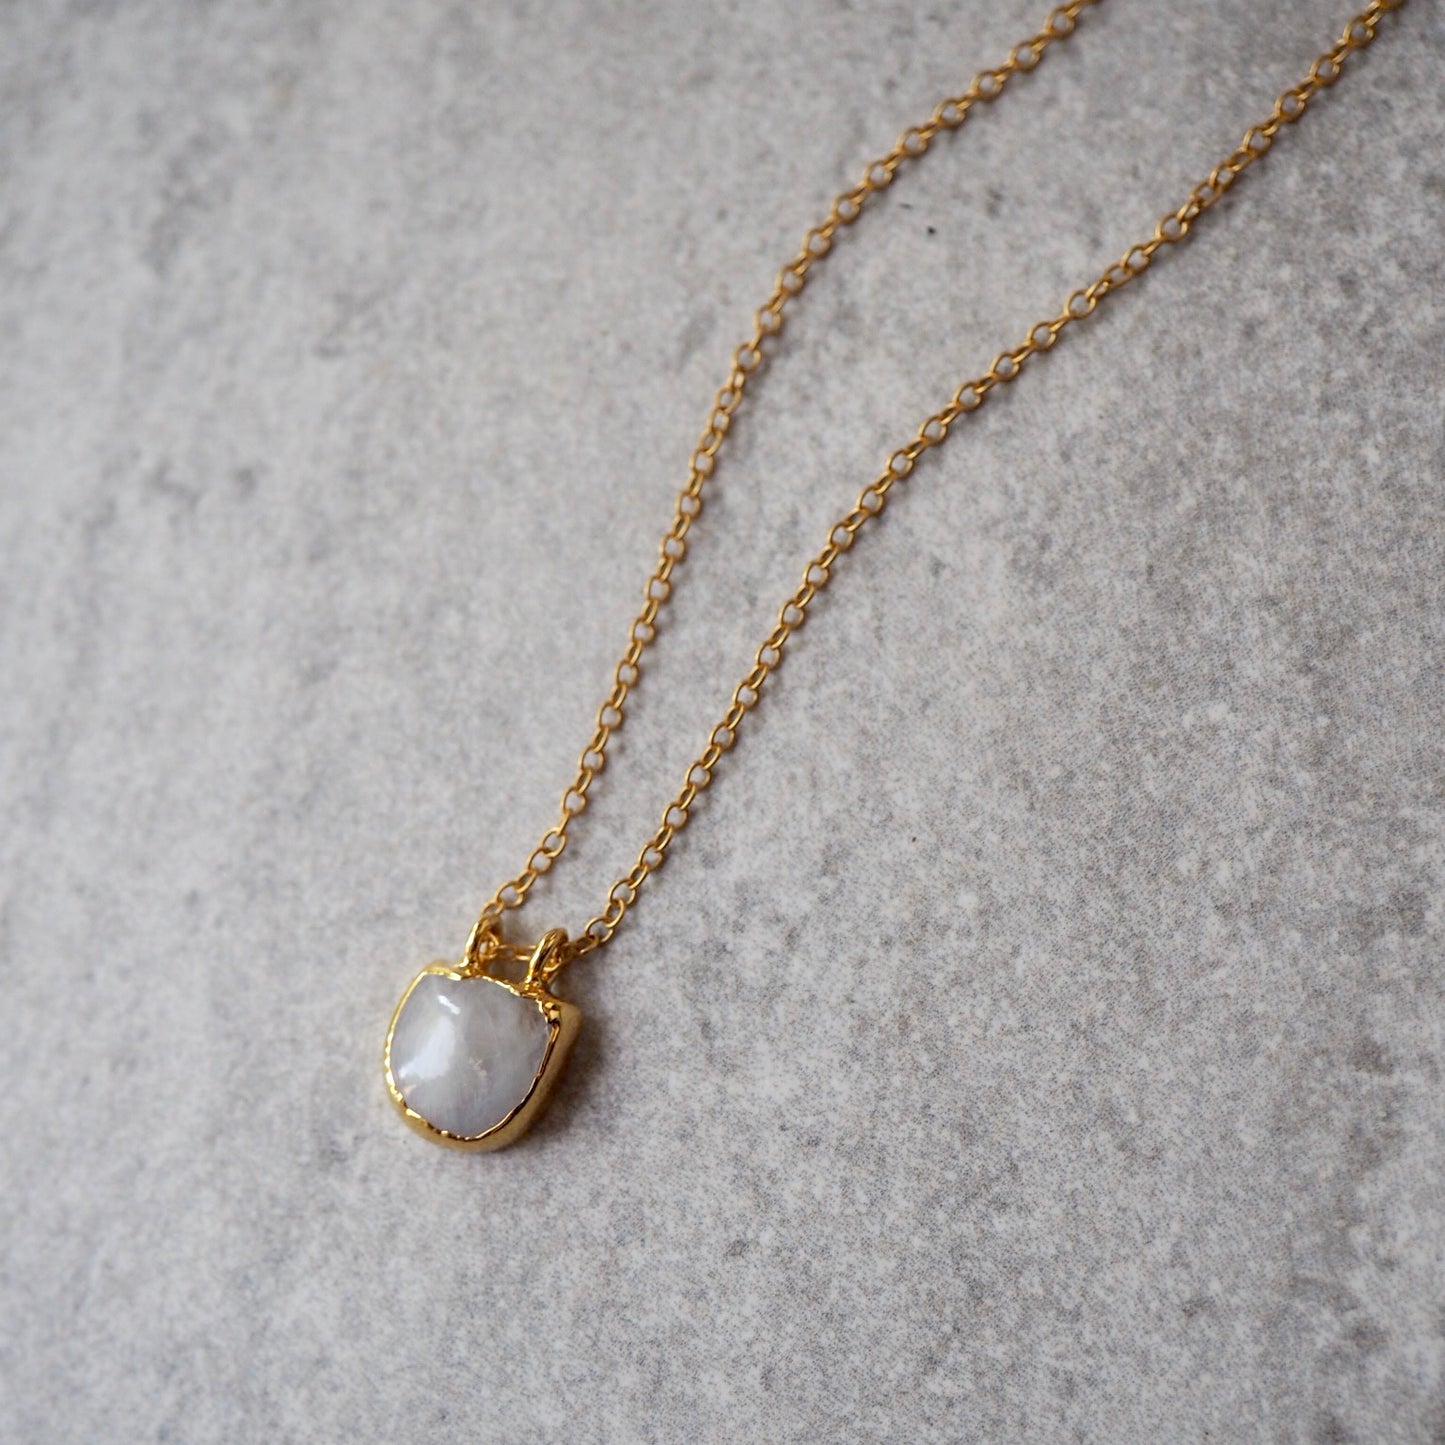 14k gold filled chain with Moonstone gemstone pendant